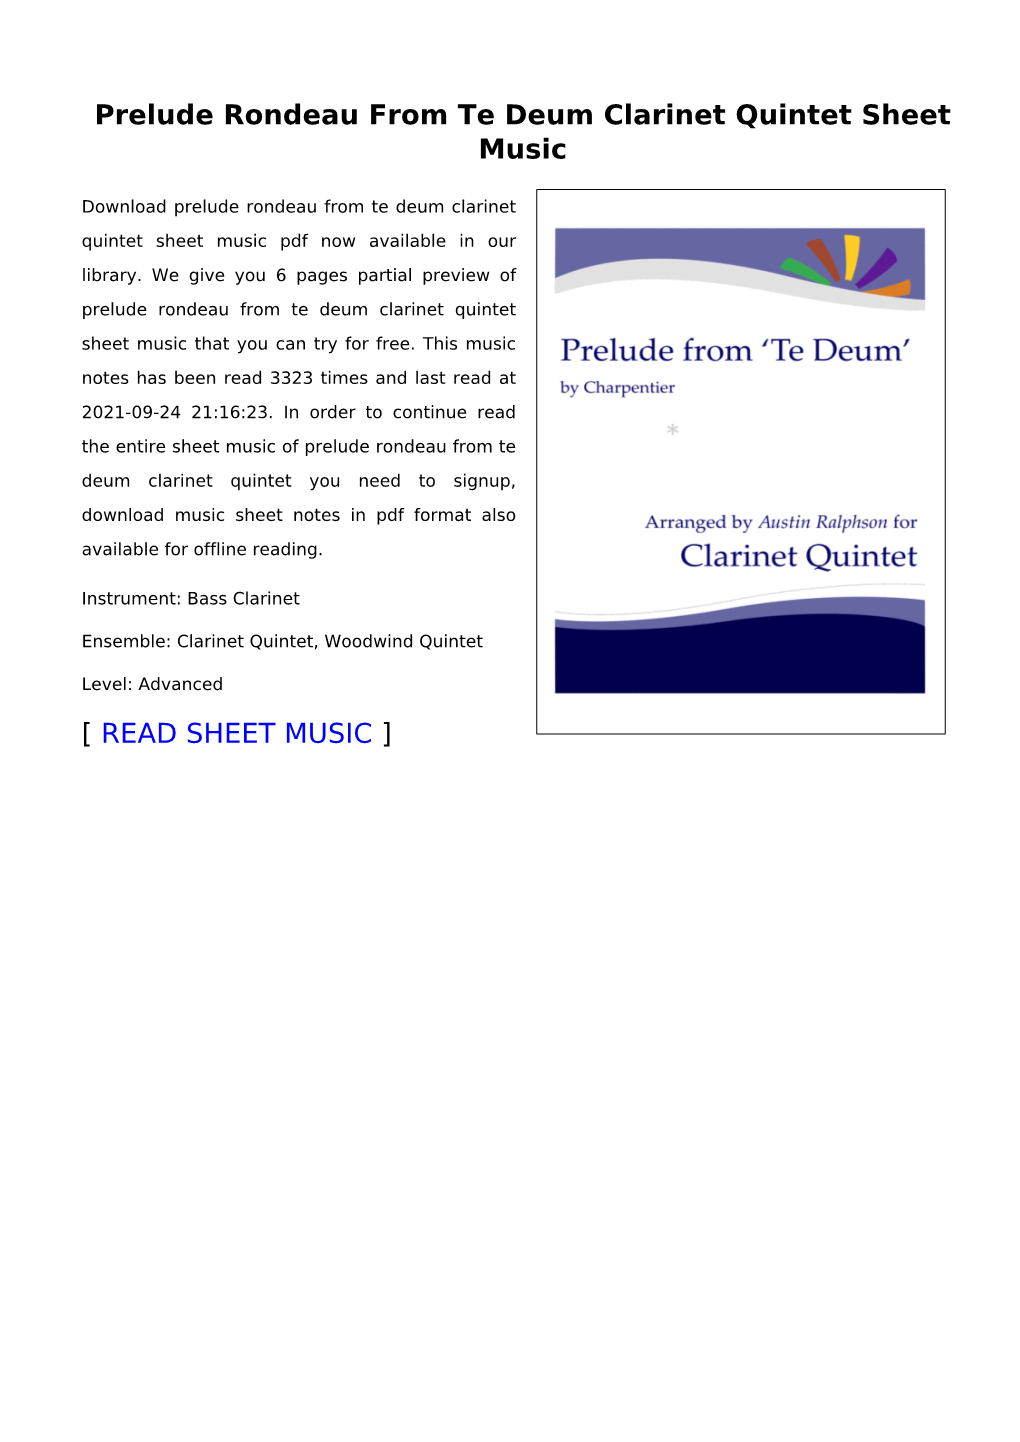 Prelude Rondeau from Te Deum Clarinet Quintet Sheet Music